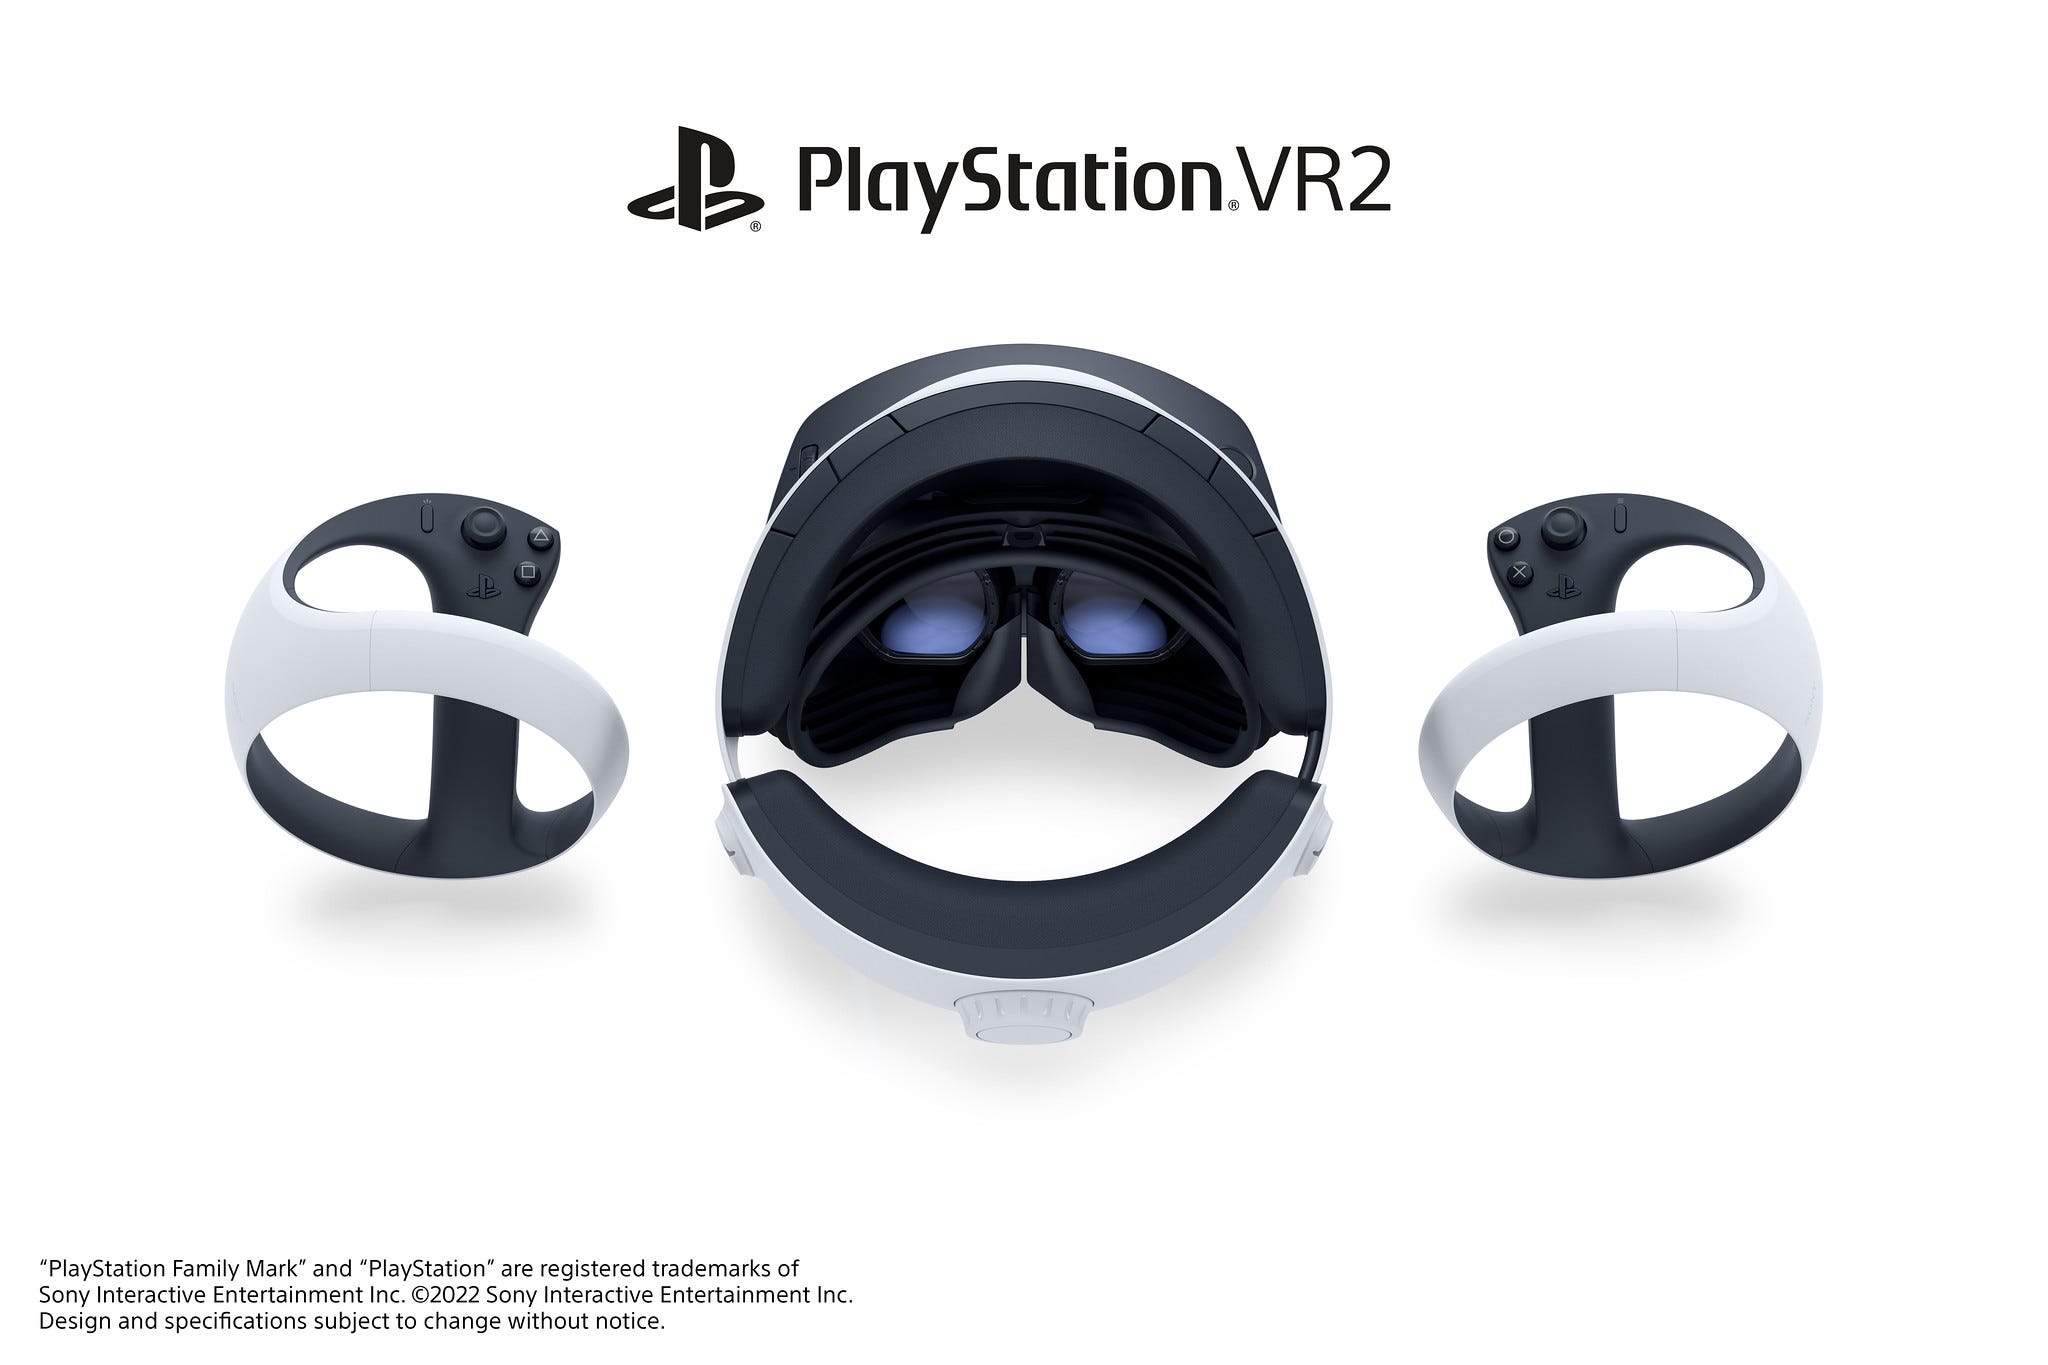 PSVR 2 headset photo with controllers